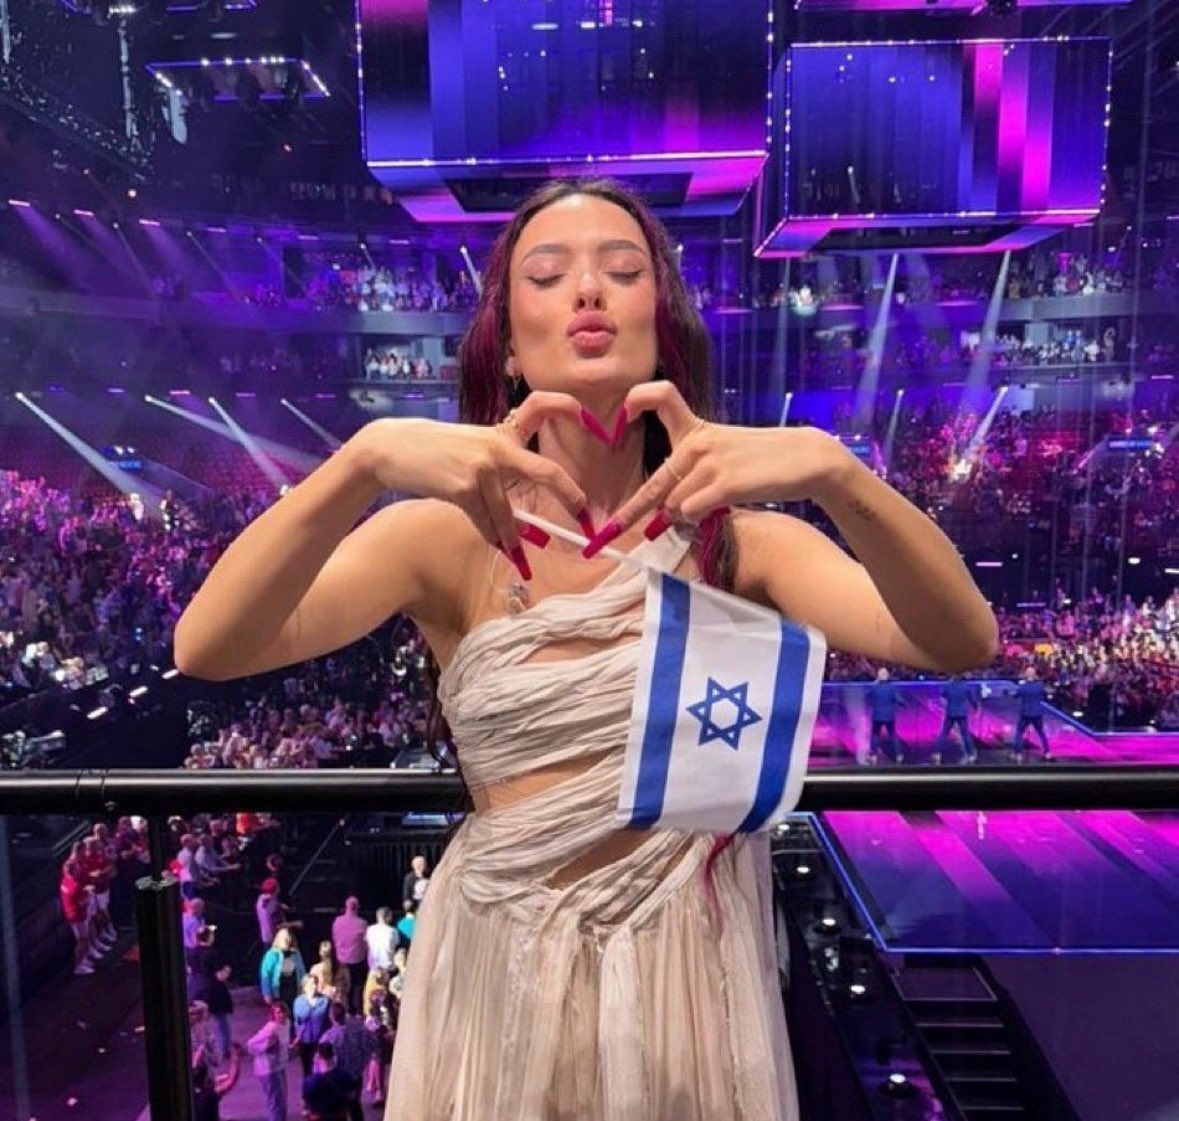 Israeli singer Eden Golen finished in 5th place tonight in the Eurovision after giving an emotional performance of her song Hurricane.

Israel finished with 375 points in total despite pressure groups and protesters attempting to stop them participating in the song competition.